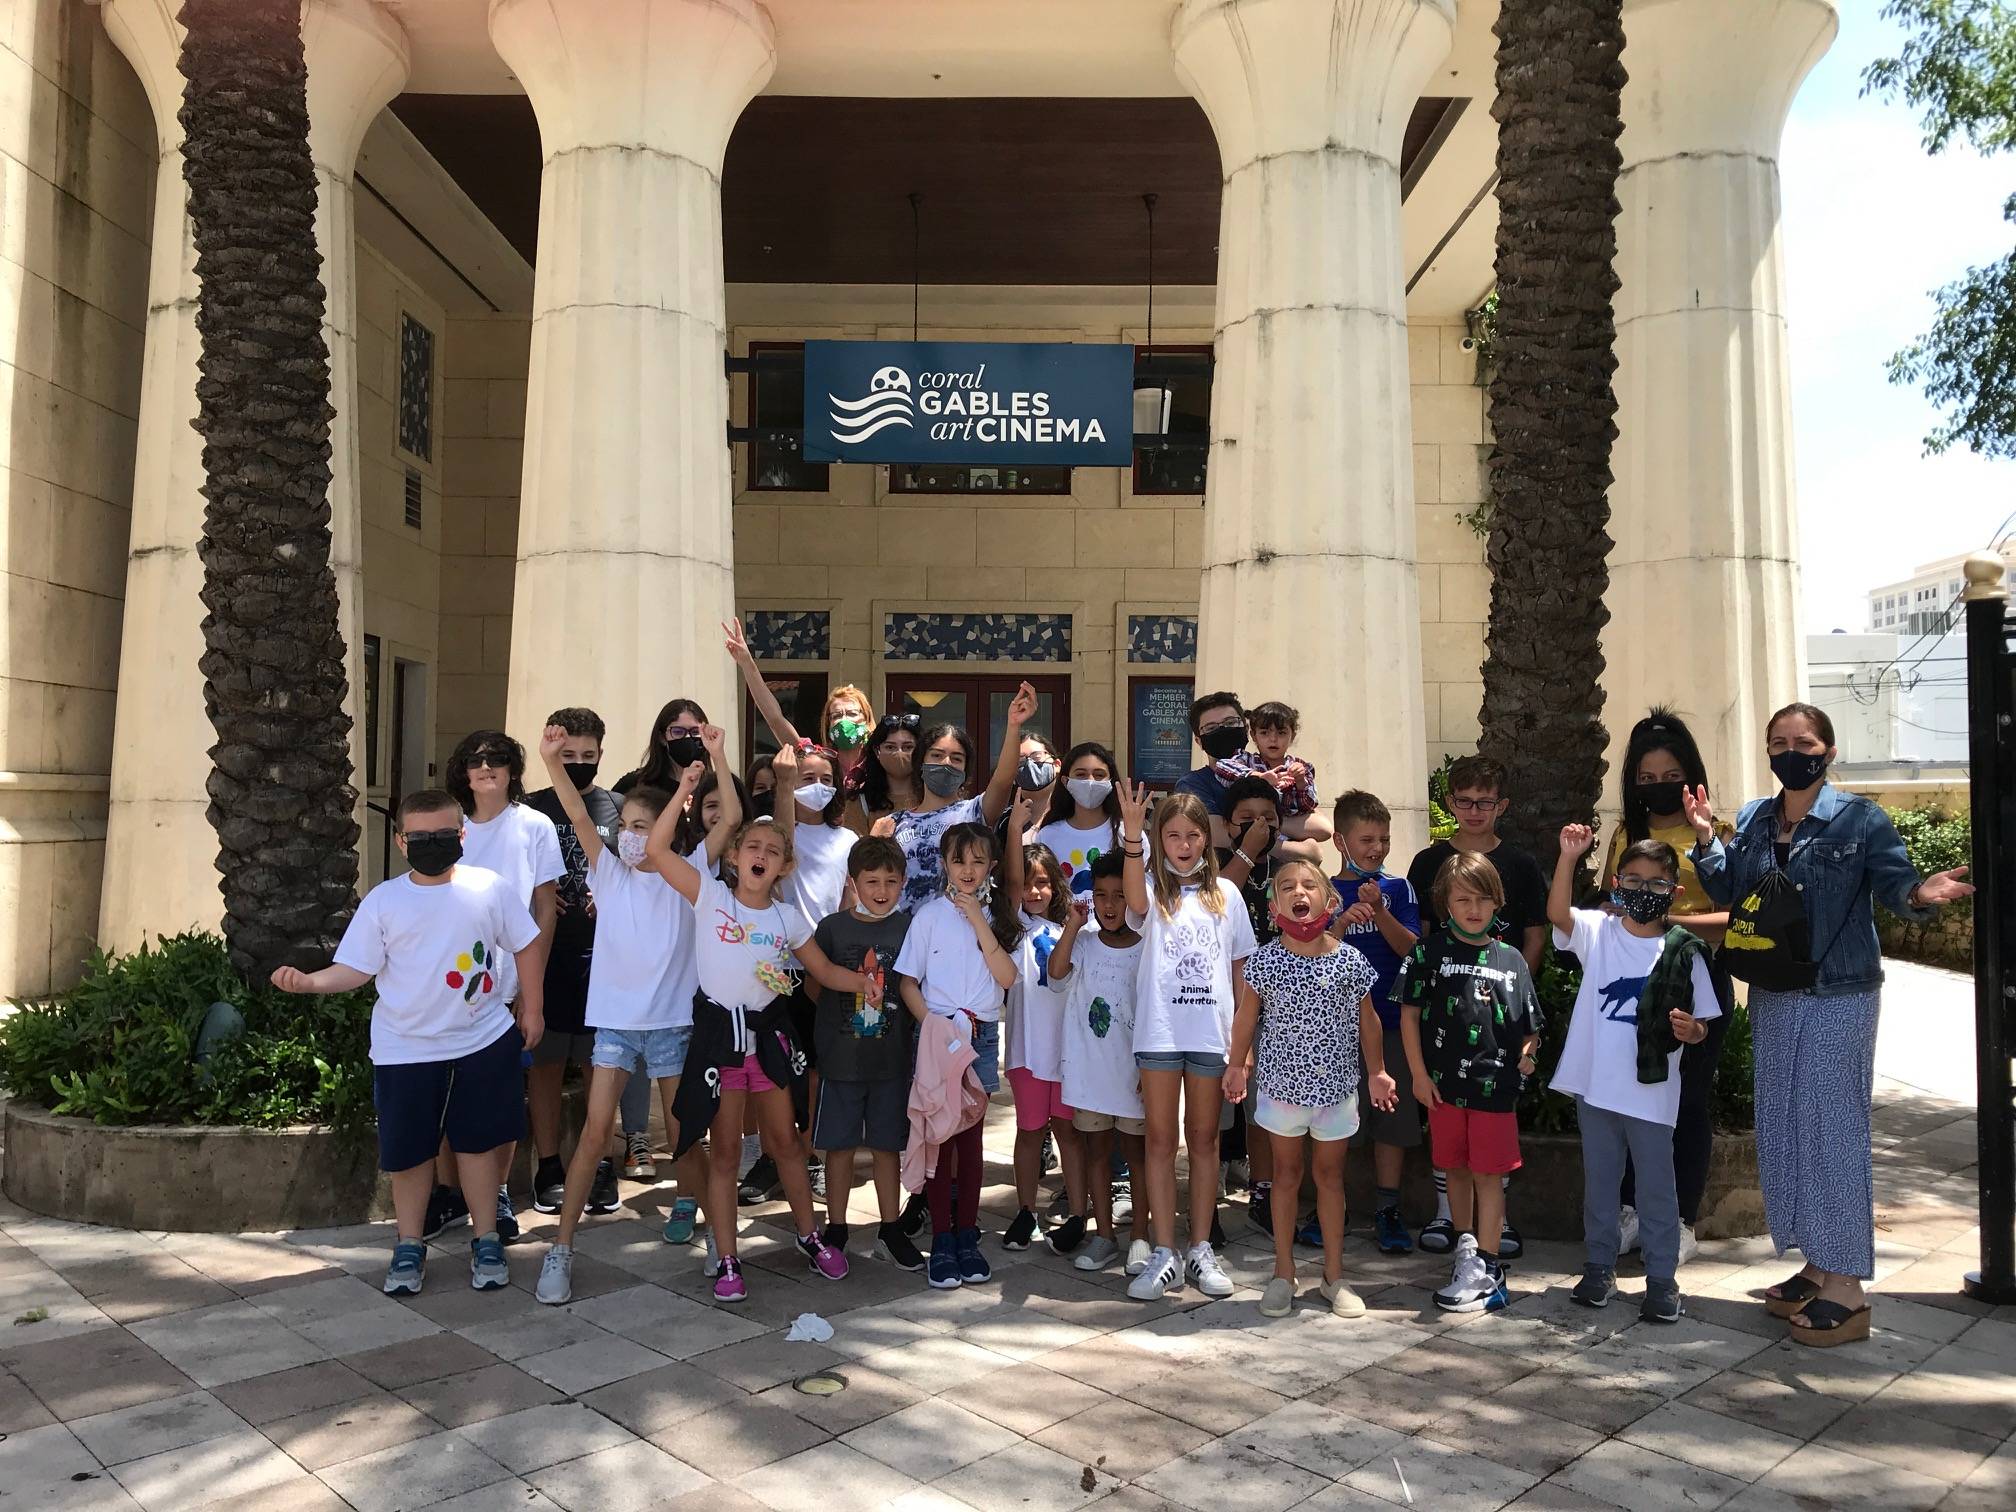 Children standing in front of Coral Gables Art Cinema